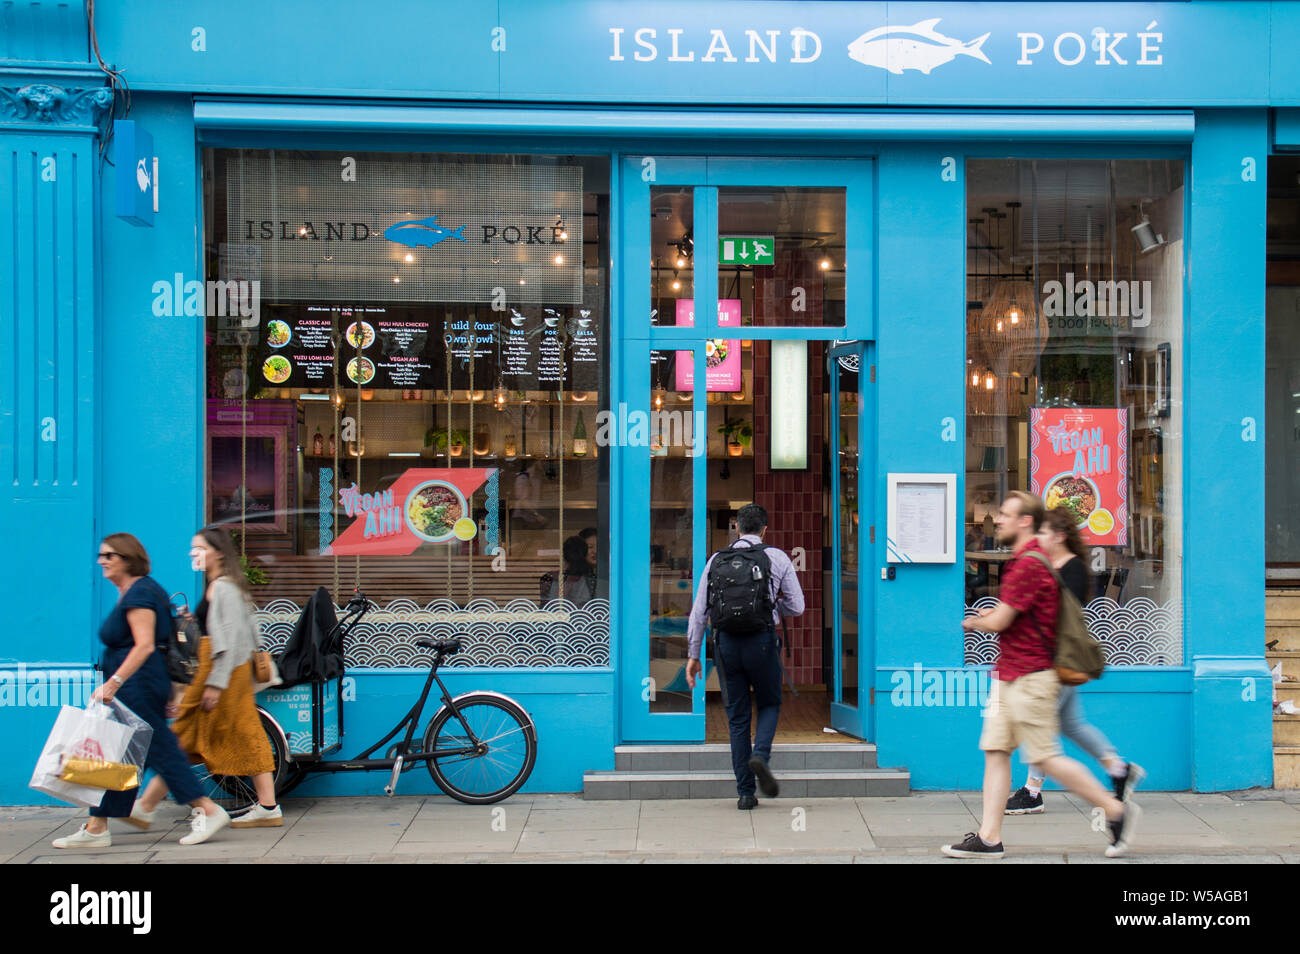 Man entering Island Poke food outlet in London shoreditch area Stock Photo